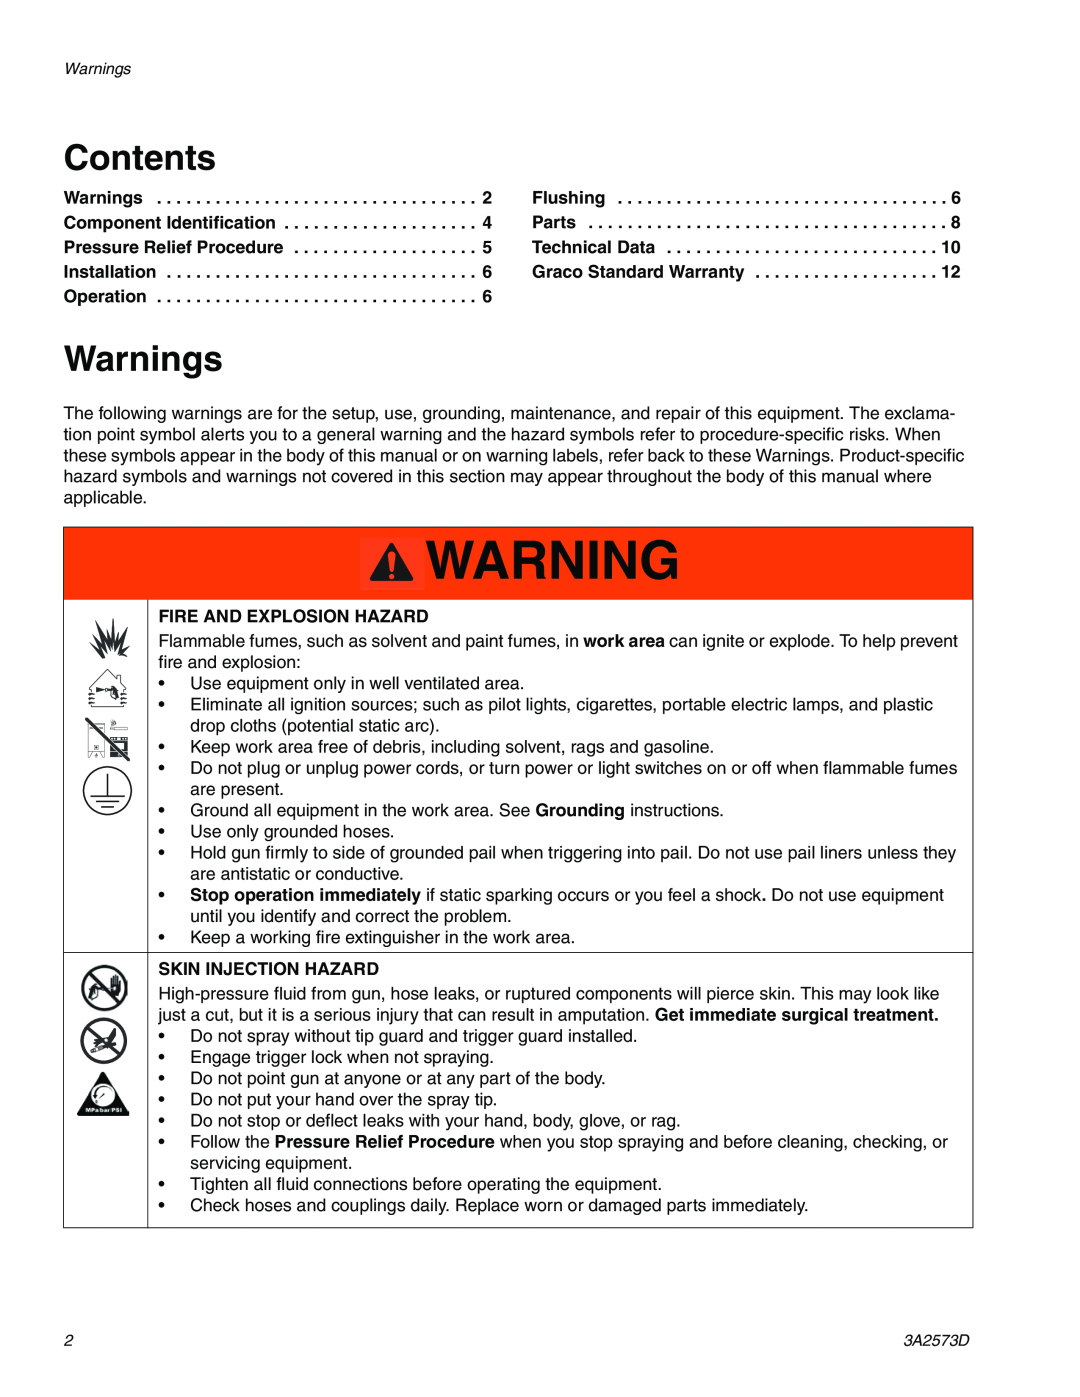 Graco 3A2573D important safety instructions Contents, Warnings, Fire And Explosion Hazard, Skin Injection Hazard 